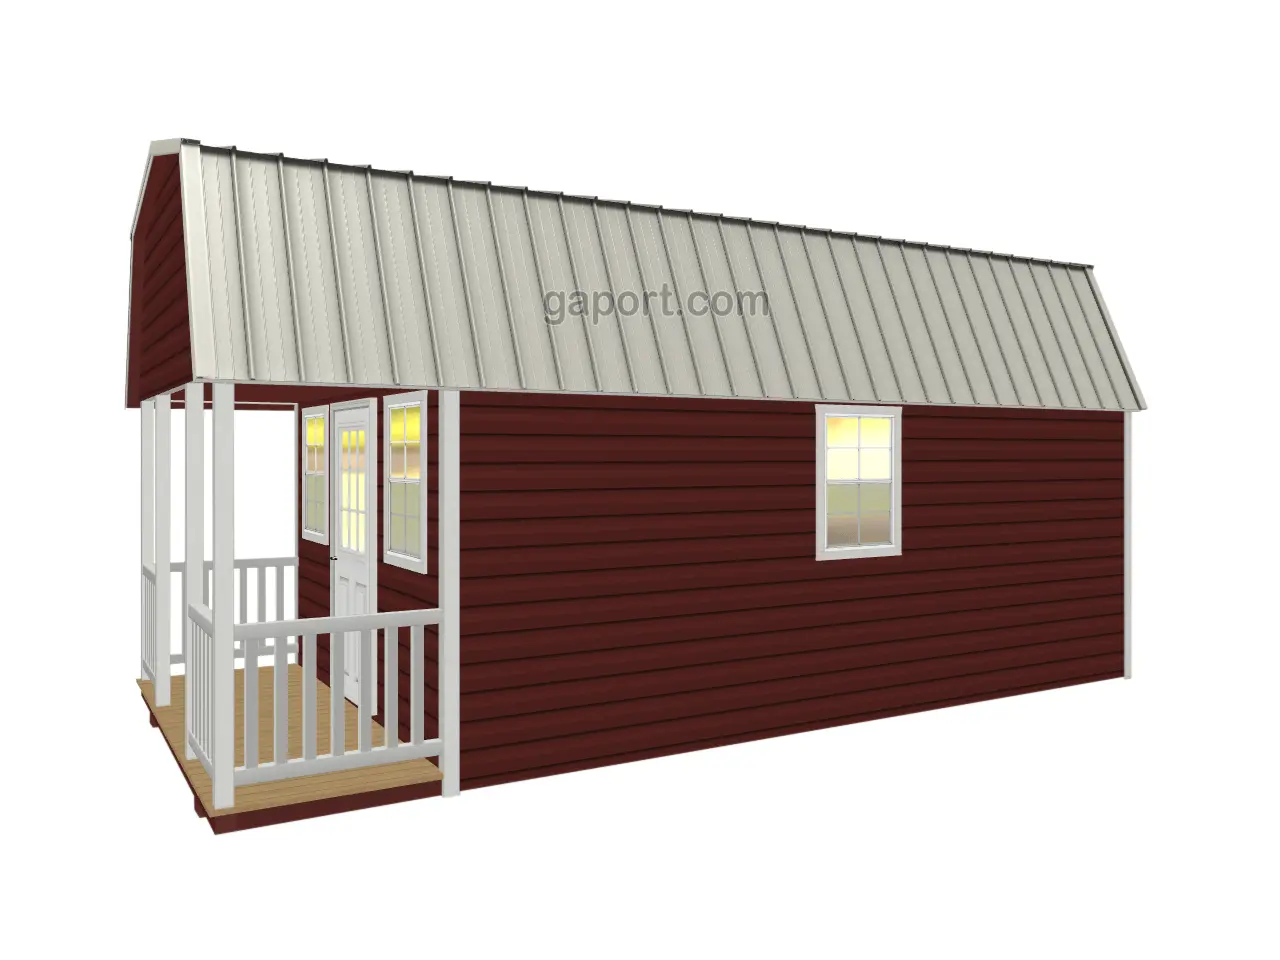 Super nice burgundy barn shed with loft and ornate front porch that is equipped with four windows.